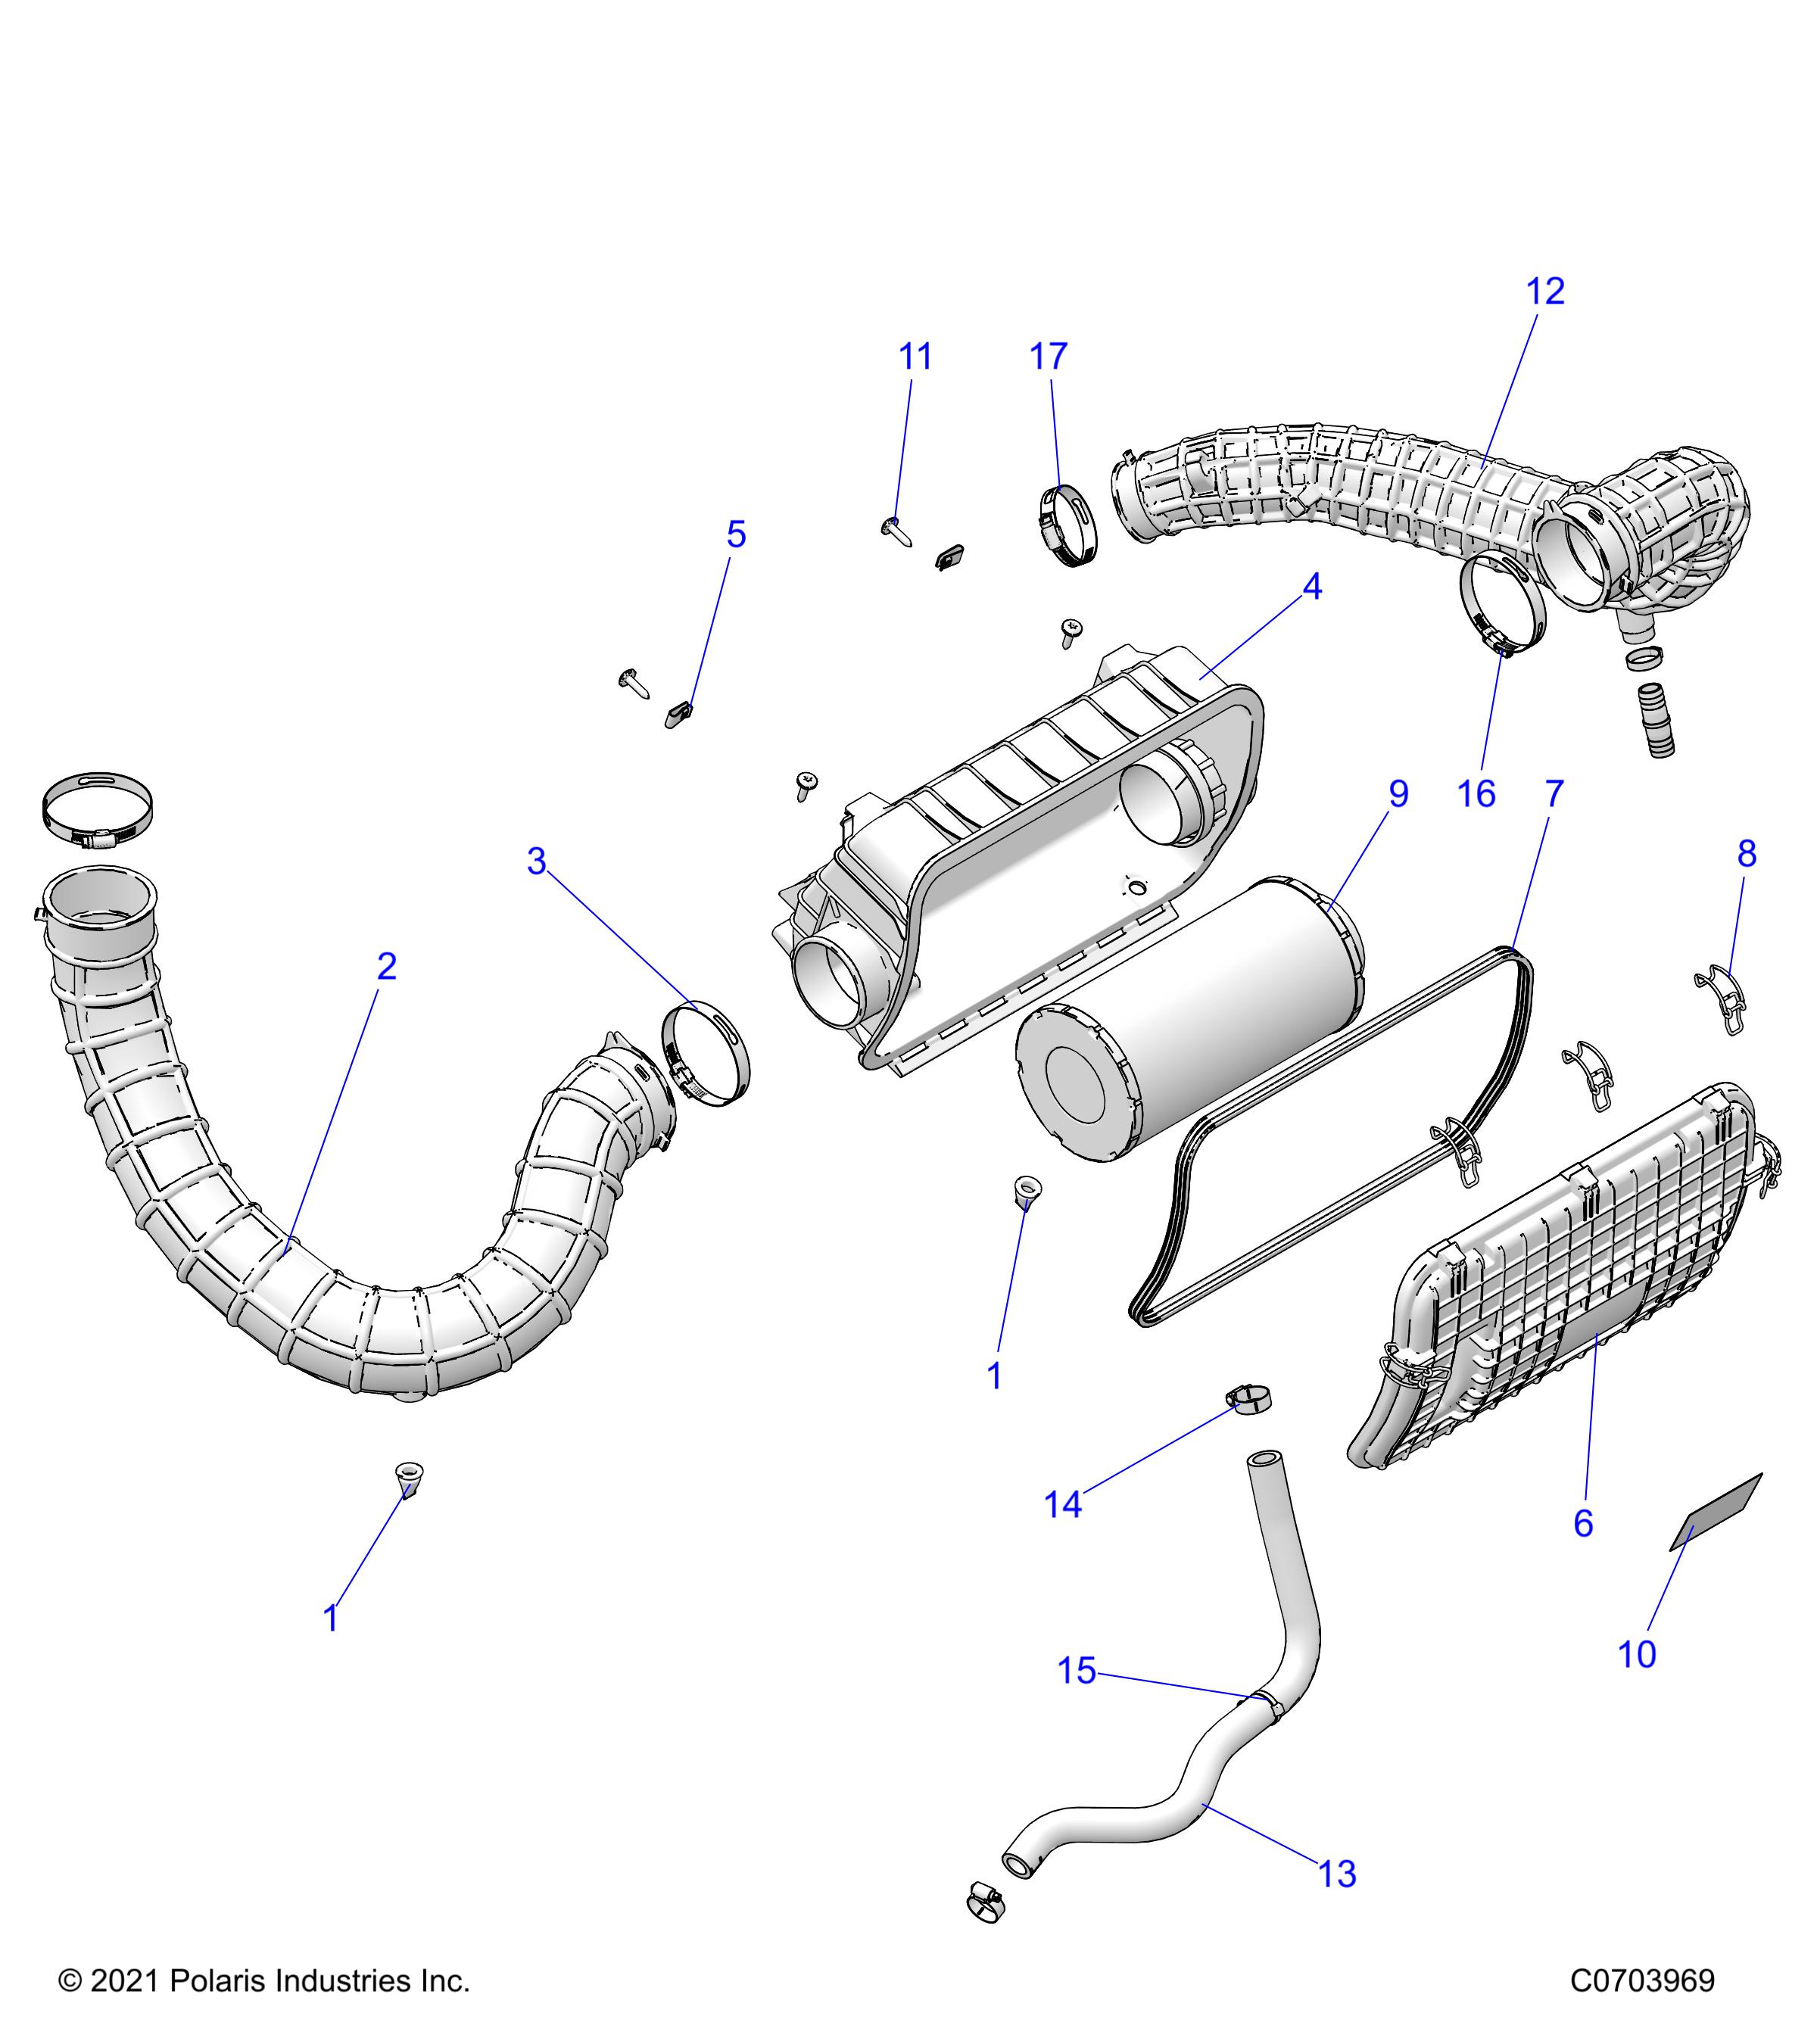 Part Number : 1244610 ASM-HOSE AIRBOX IN